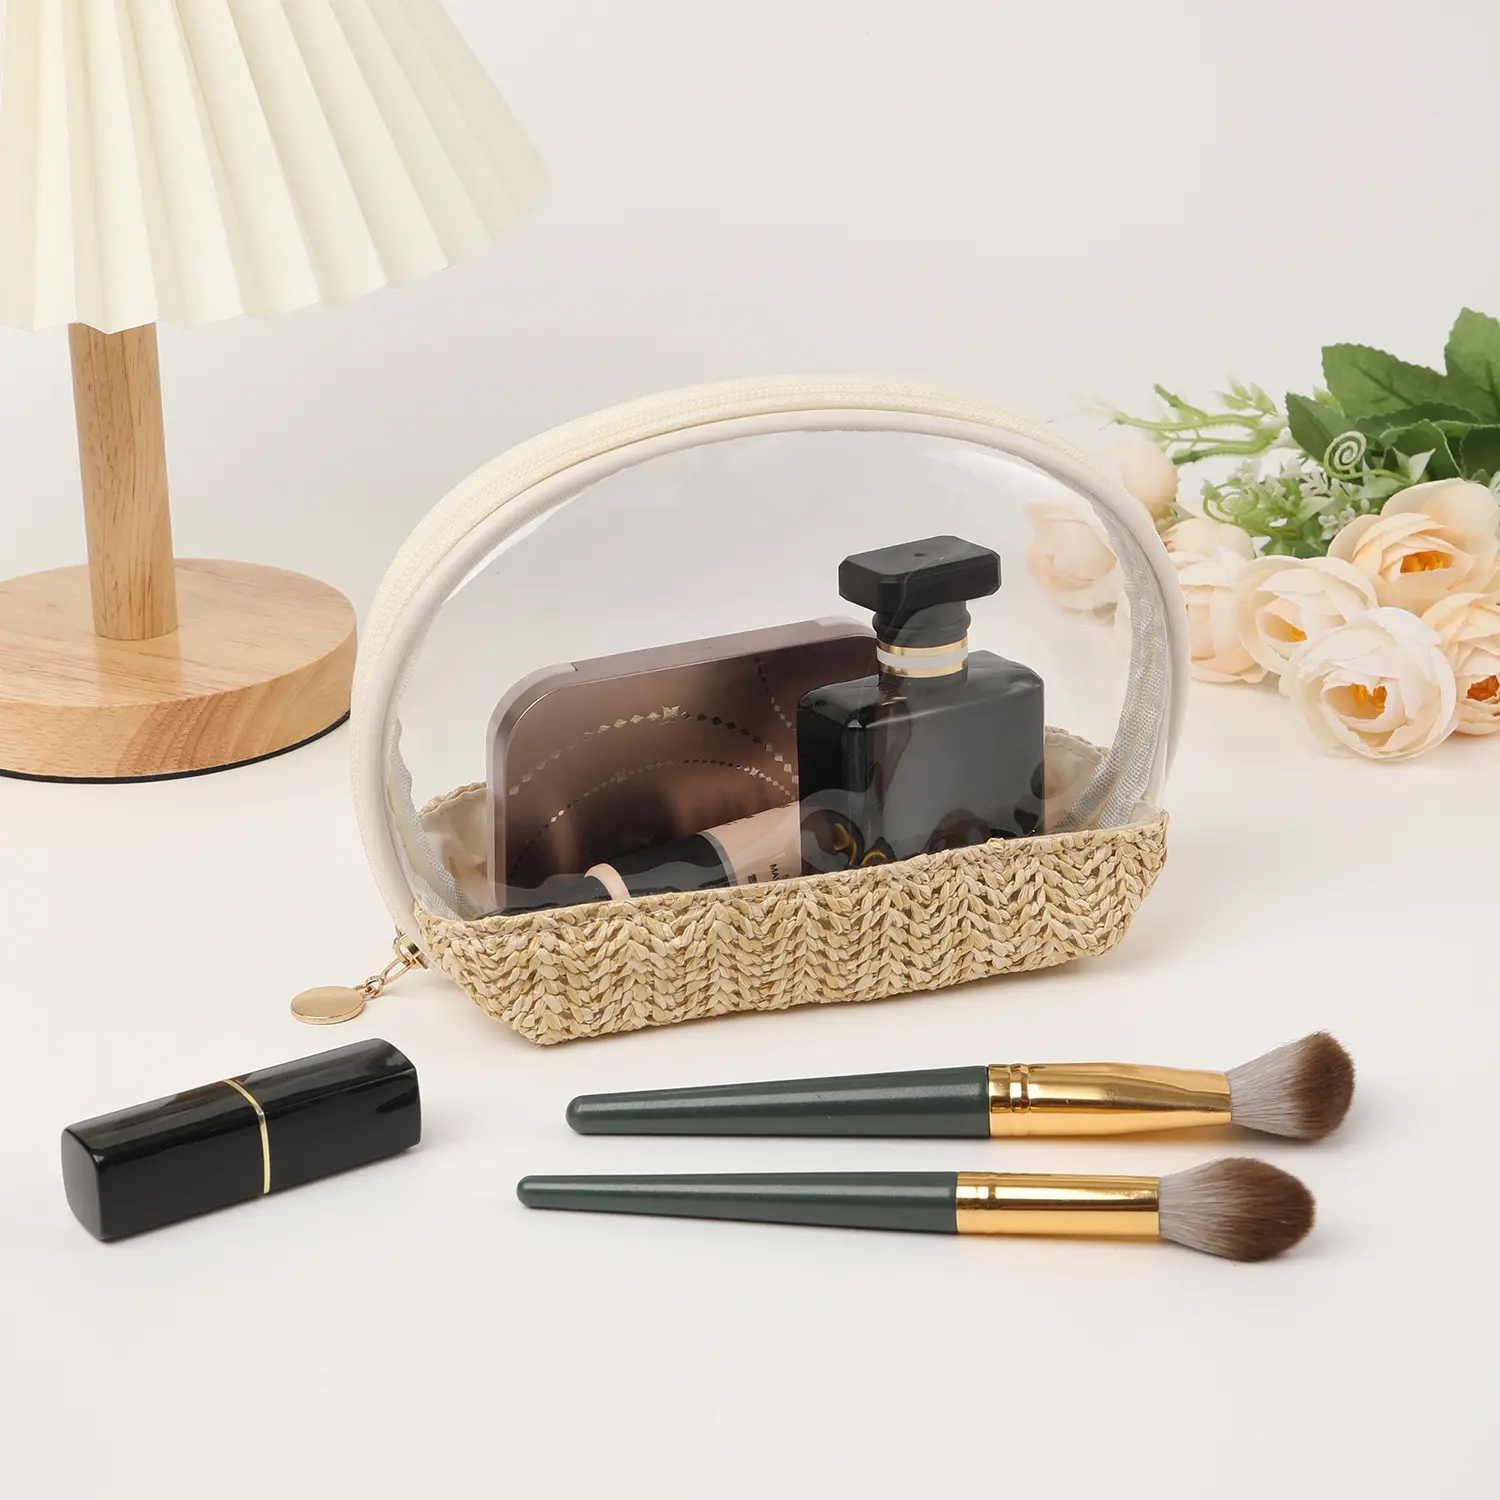 Clear PVC Bag Straw Clutch Handmade Pouch Bag Transparent Woven Straw Make Up Cosmetic Bag